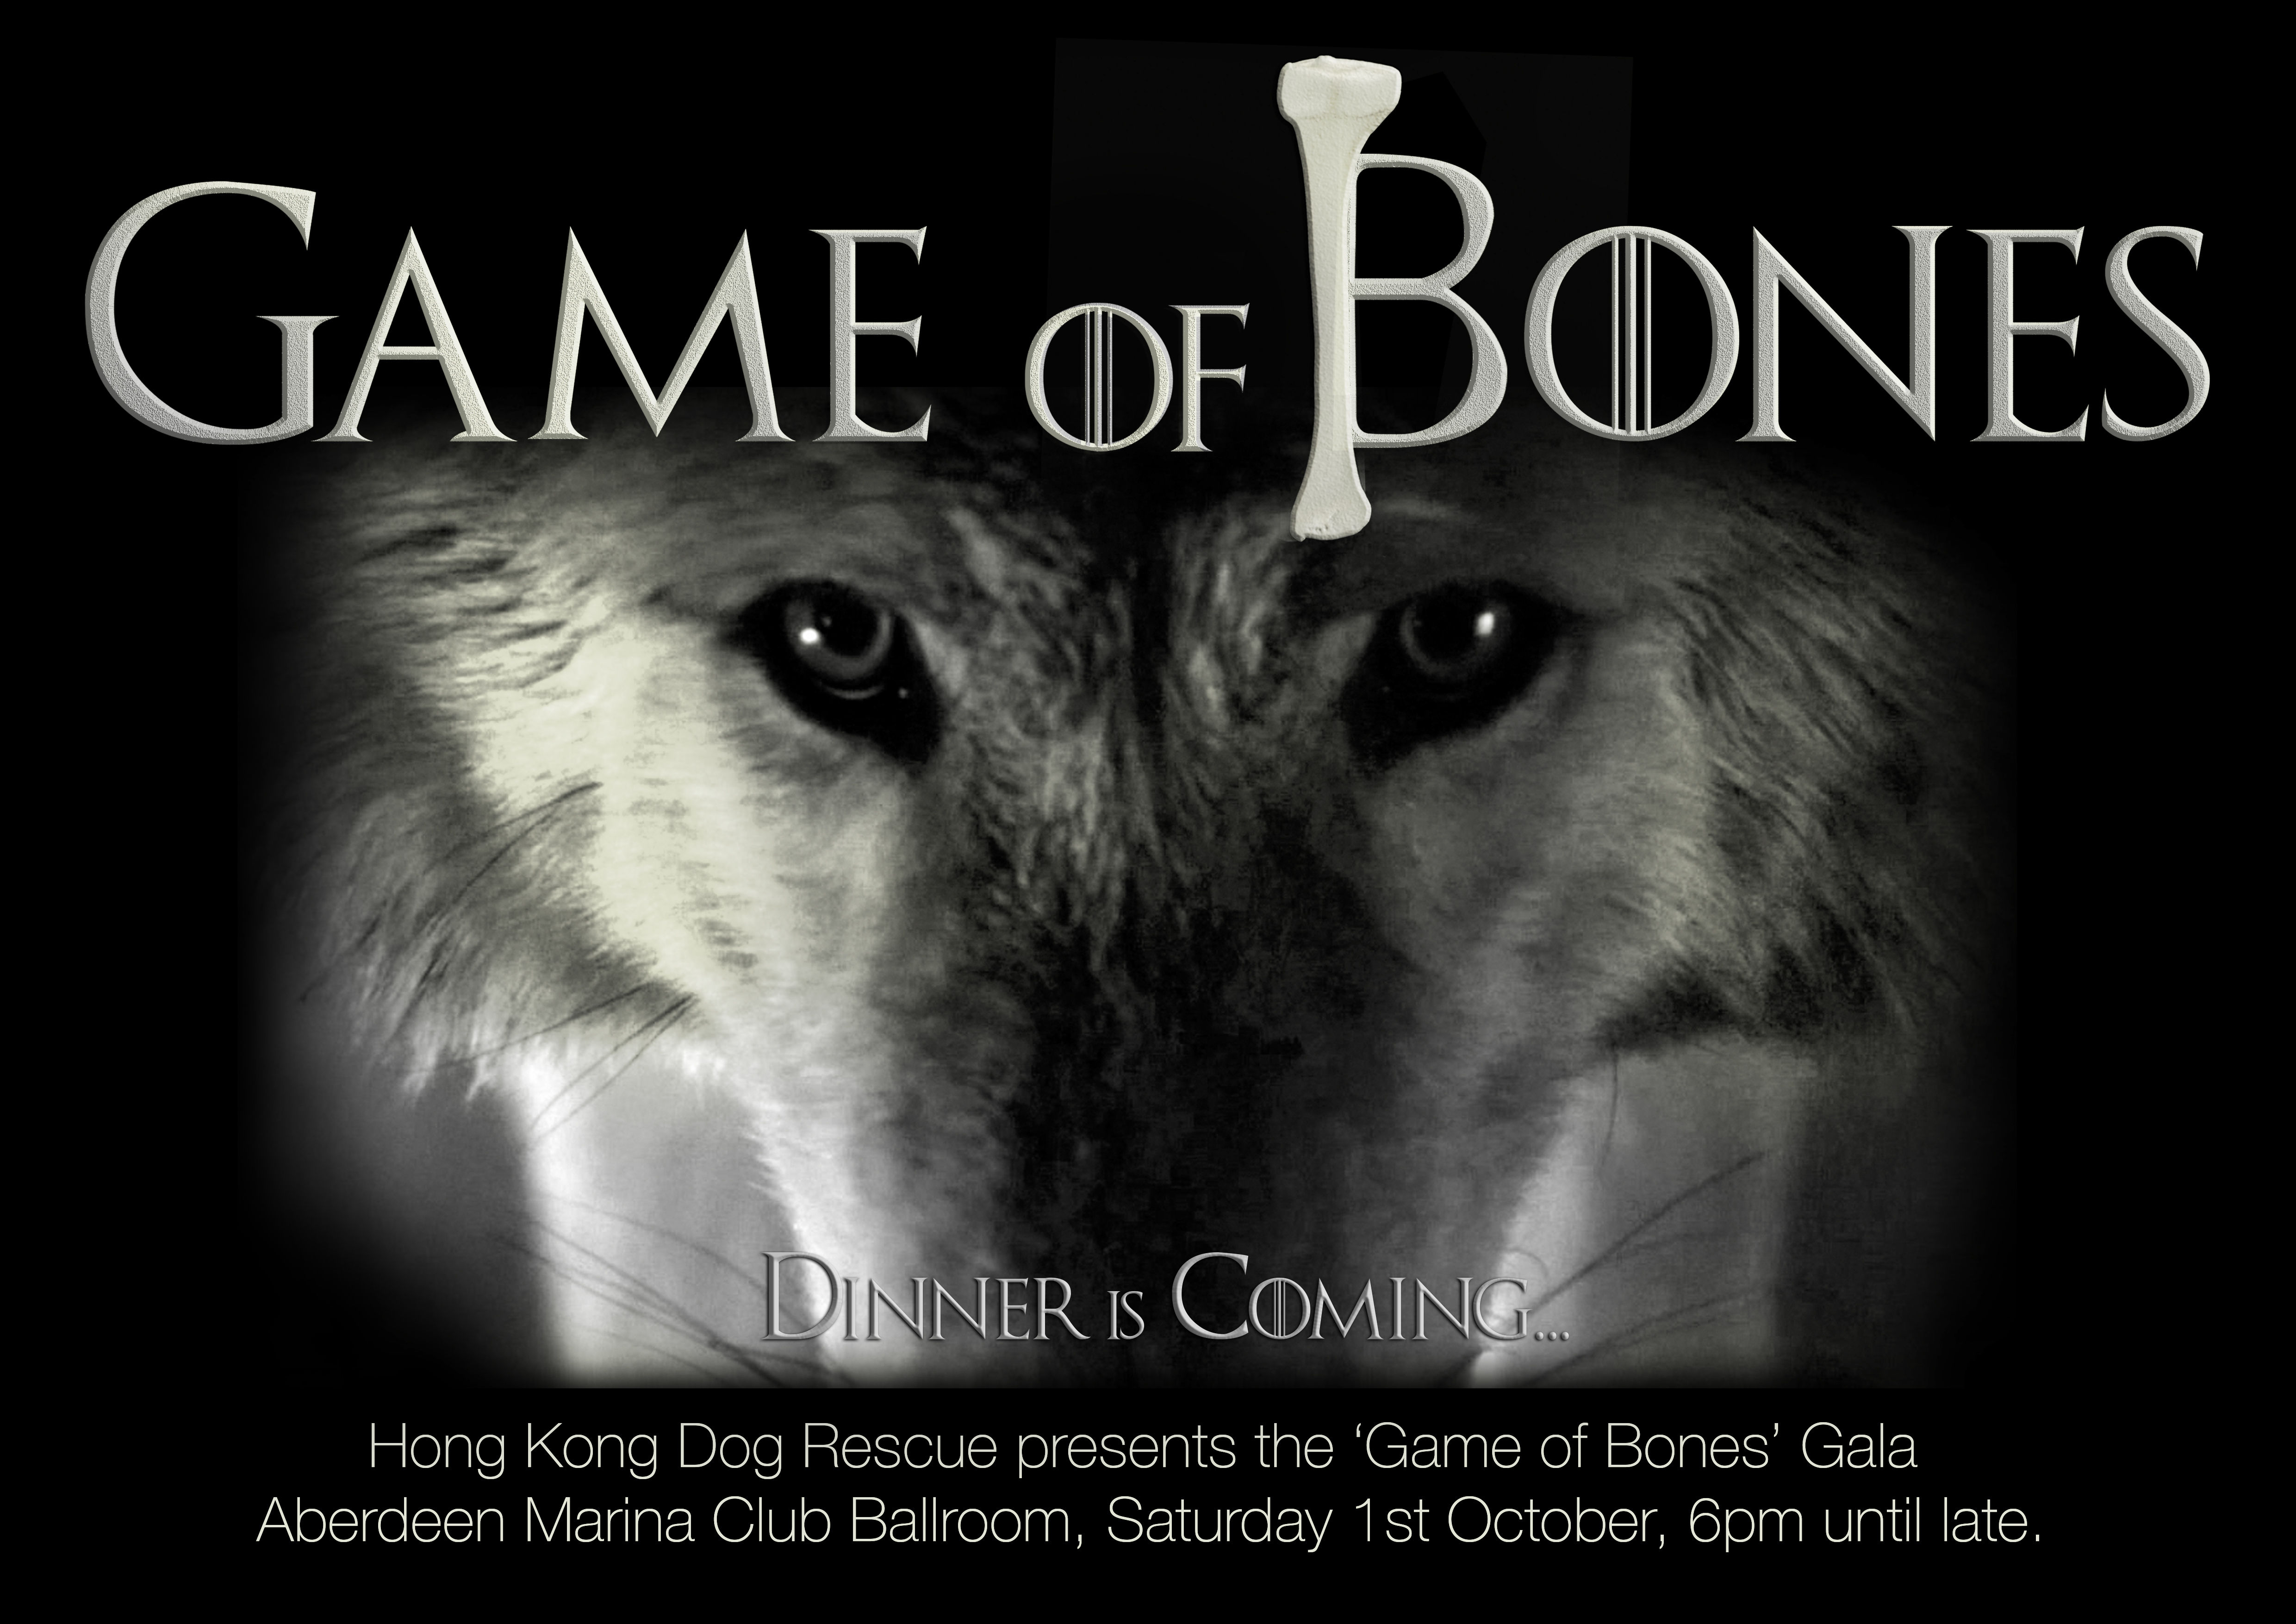 HKDR Official Invitation to Game of Bones - Dinner is coming